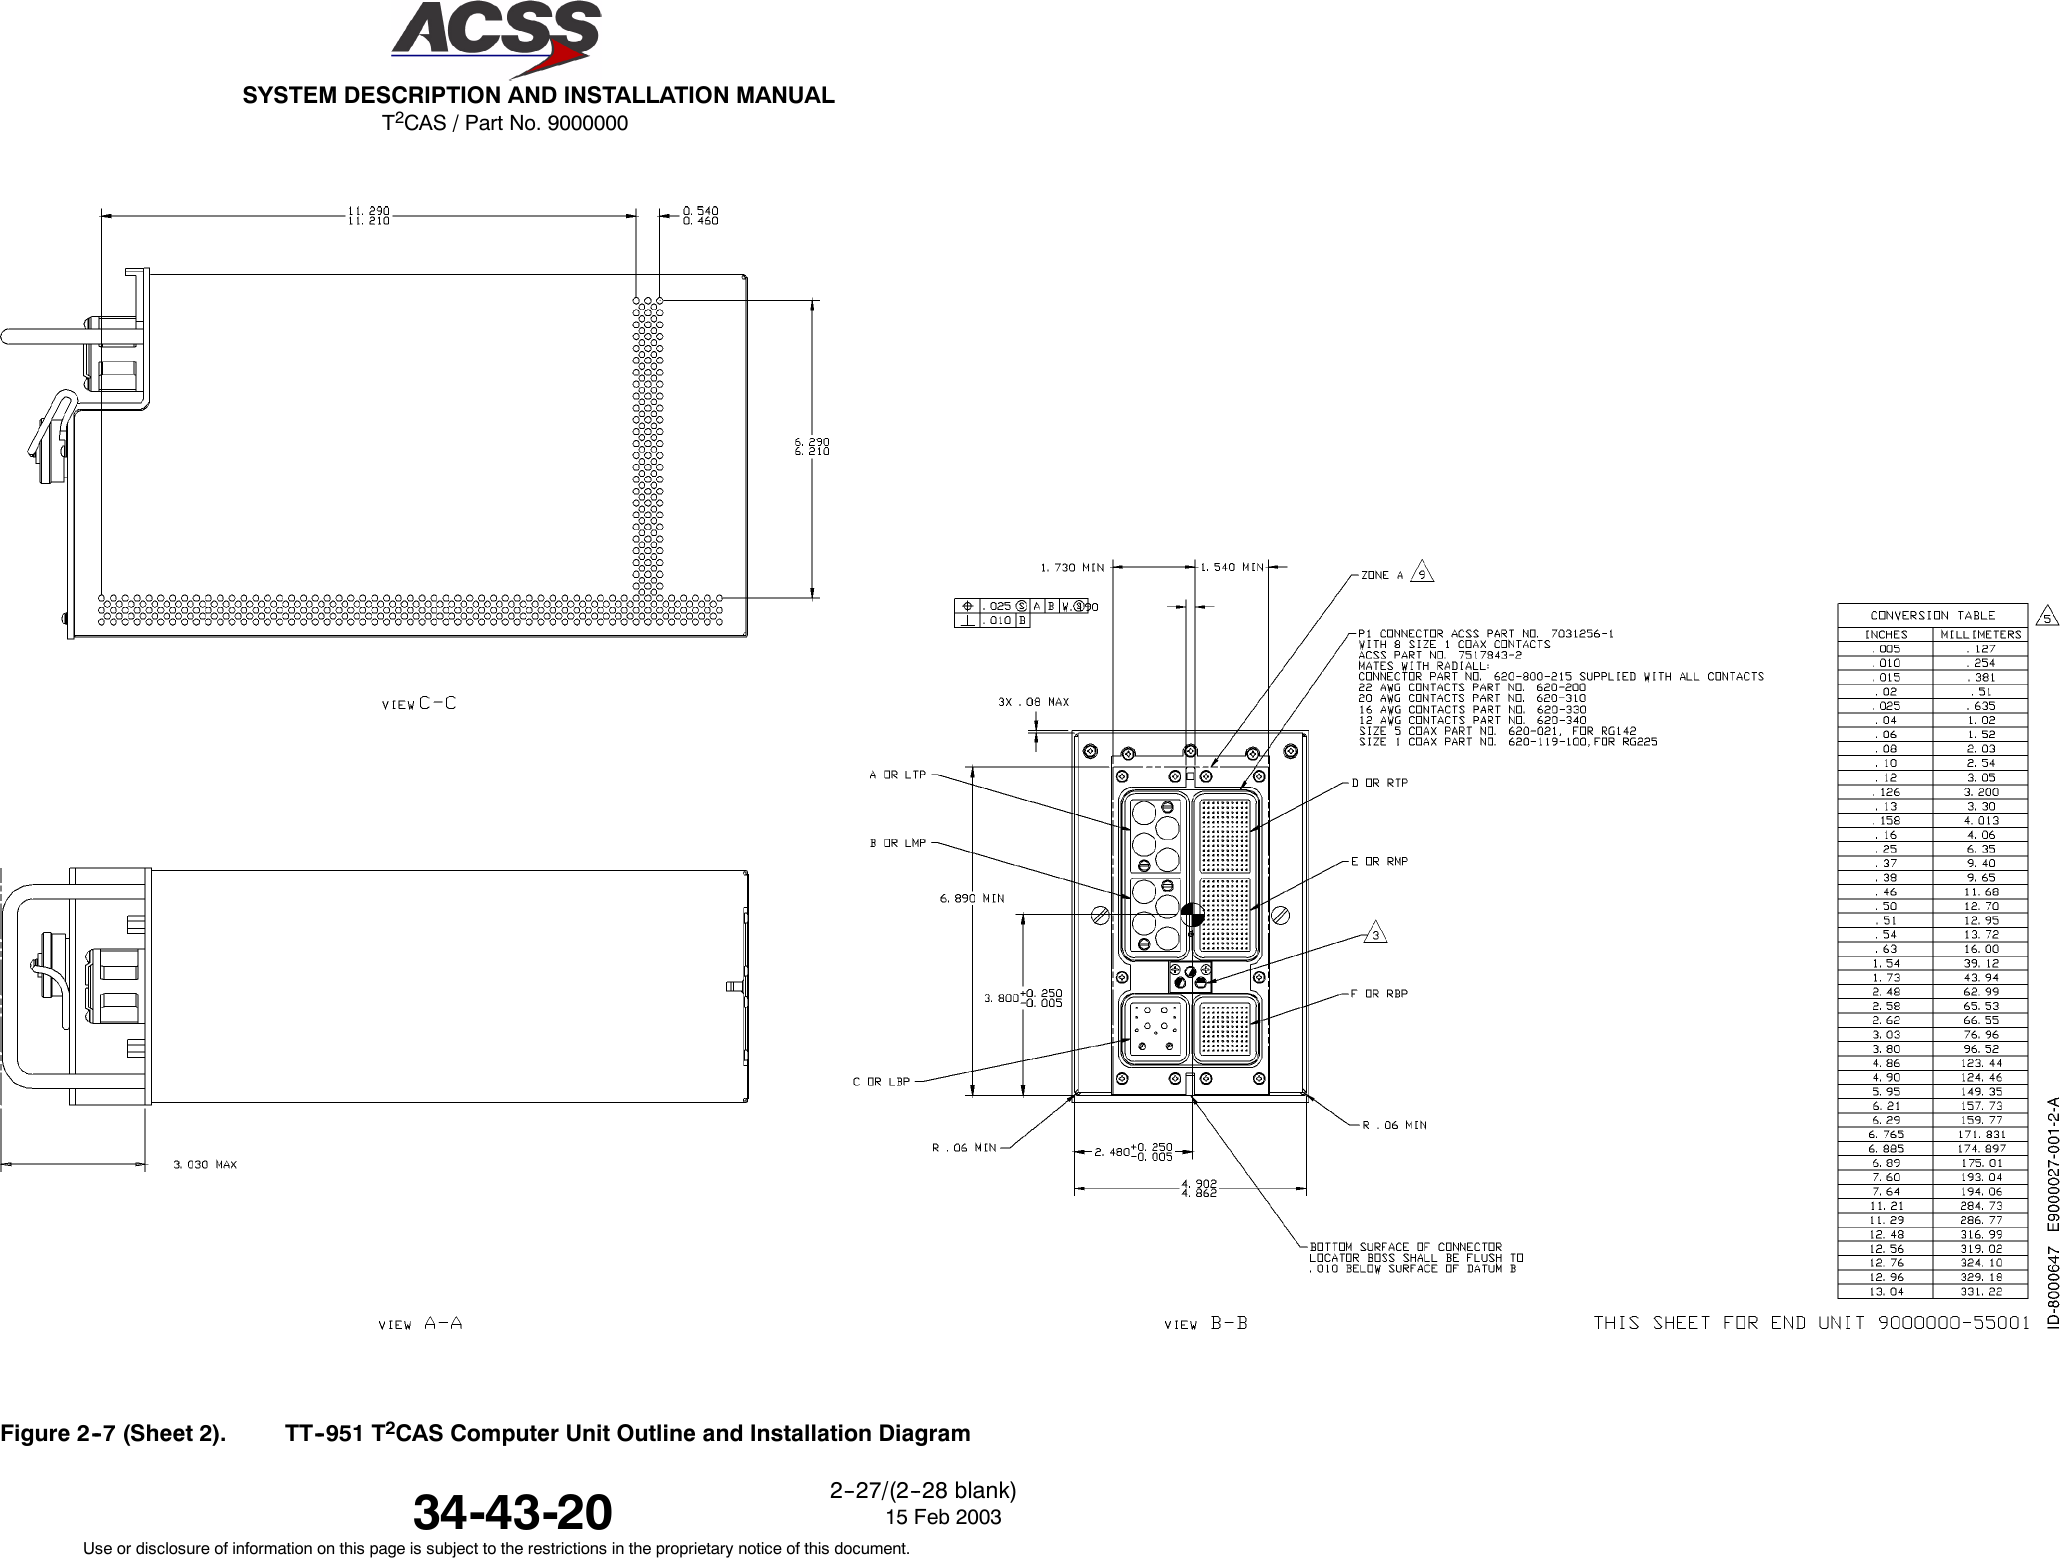 T2CAS / Part No. 9000000SYSTEM DESCRIPTION AND INSTALLATION MANUAL34-43-20 15 Feb 2003Use or disclosure of information on this page is subject to the restrictions in the proprietary notice of this document.2--27/(2--28 blank)Figure 2--7 (Sheet 2). TT--951 T2CAS Computer Unit Outline and Installation Diagram